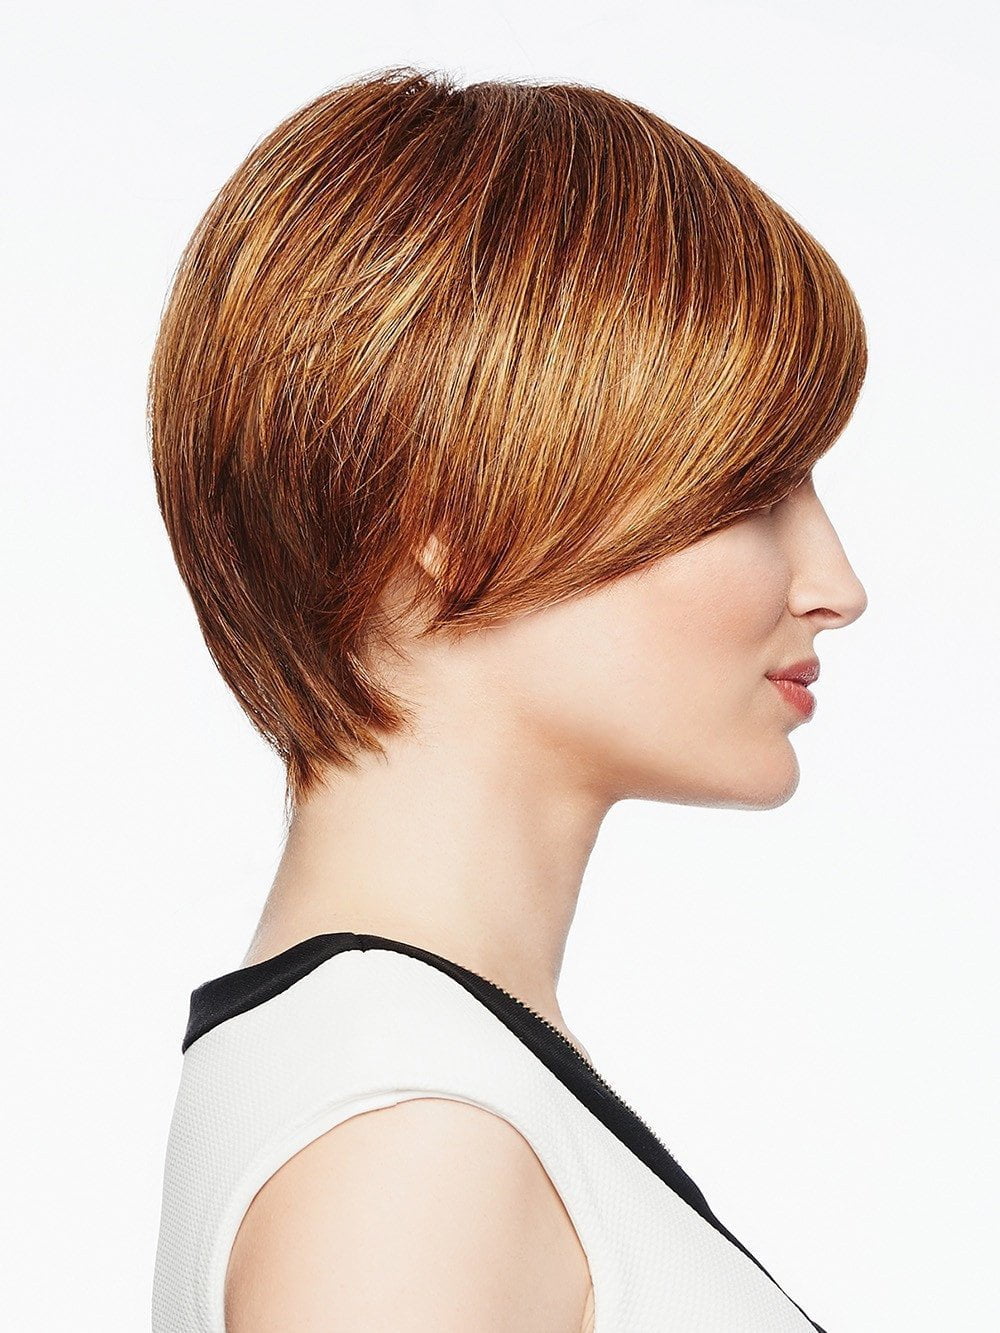 This short wig has a asymmetrical cut and added length on the right top and side.